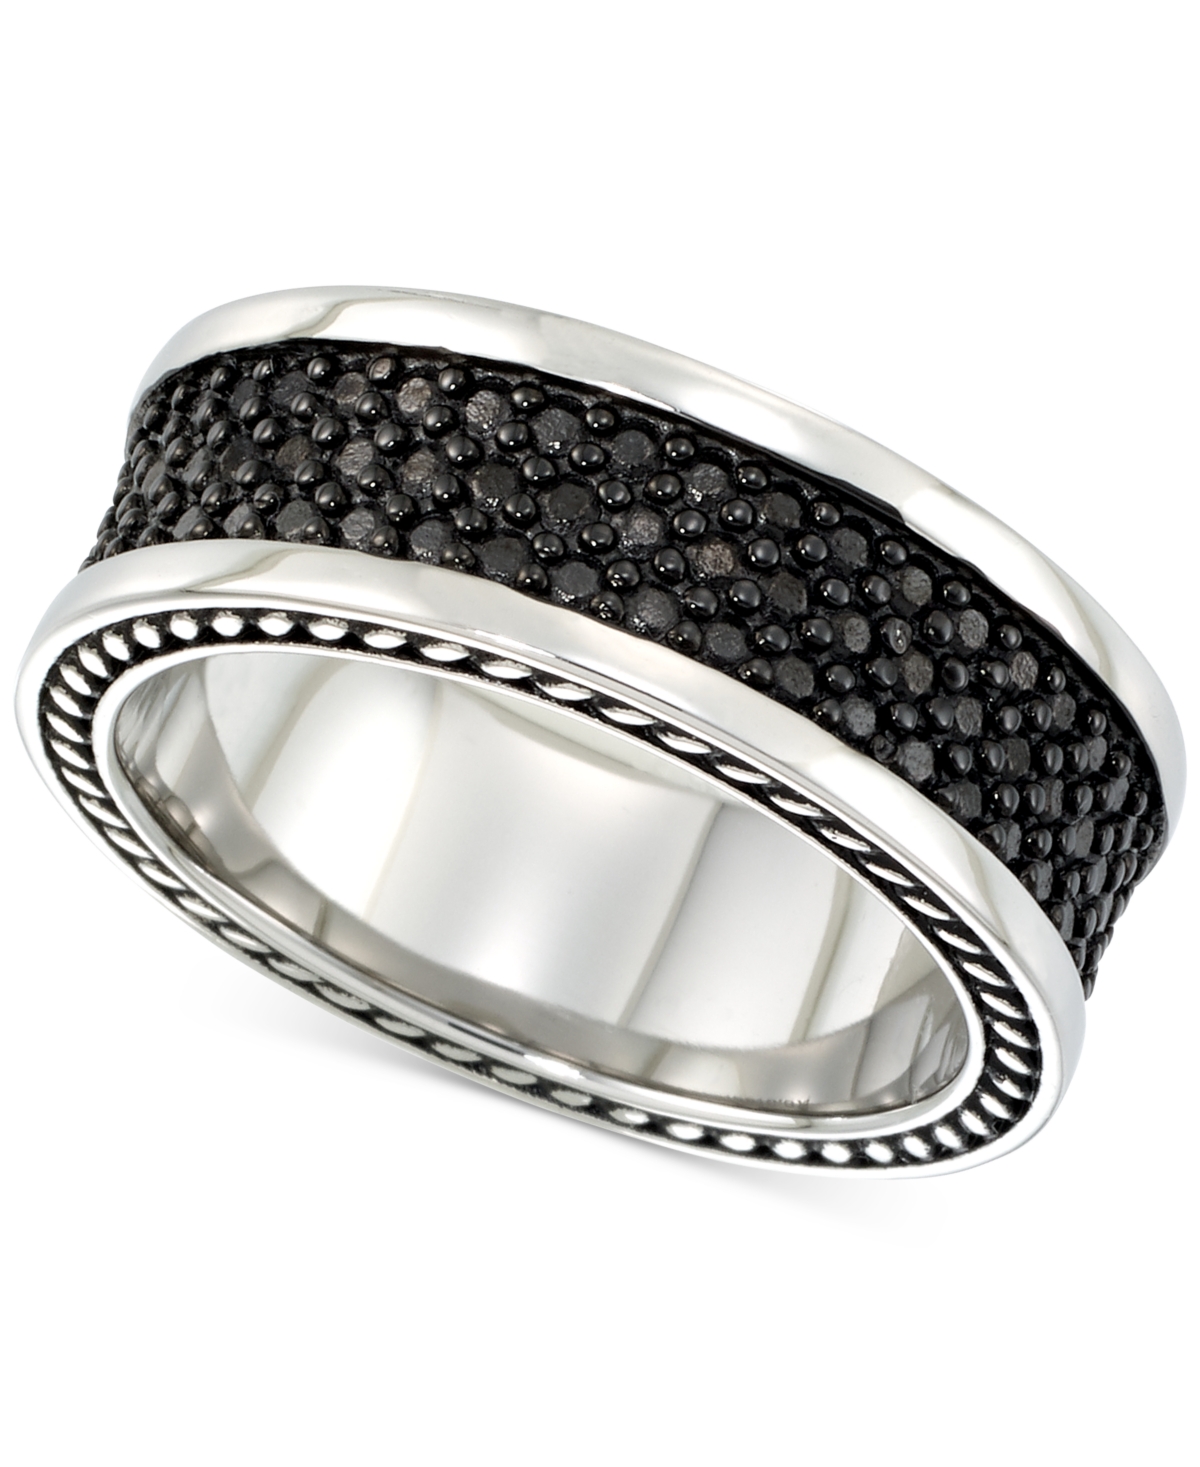 Smith Men's' Black Ion-Plated Ring in Stainless Steel - Stainless Steel